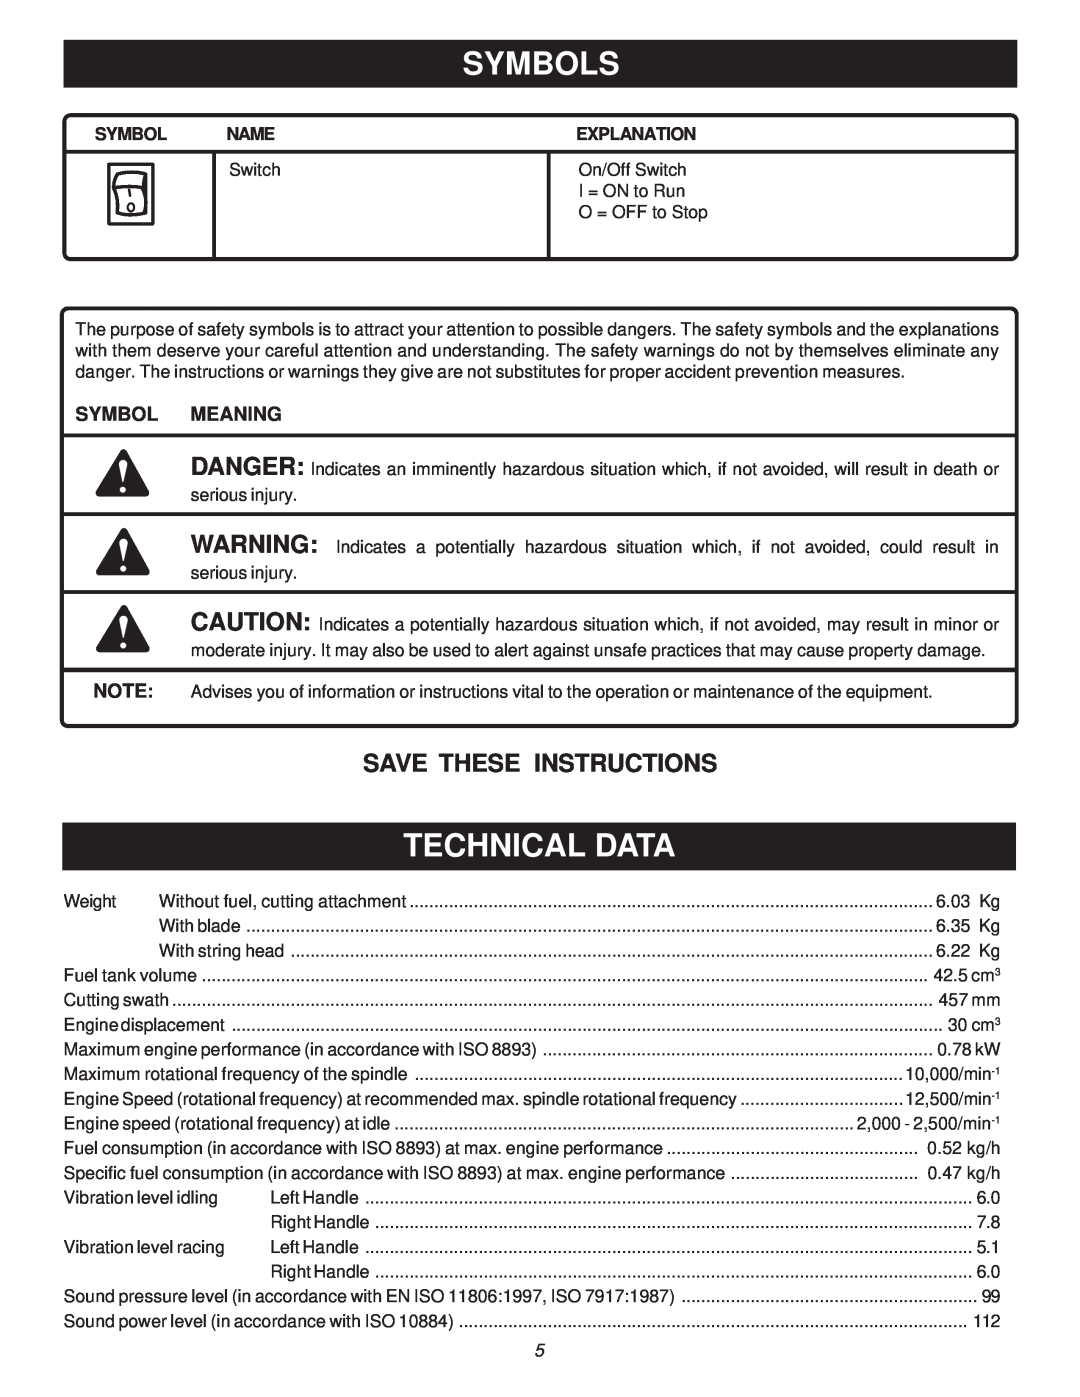 Ryobi Outdoor PBC3046B, RY70107A manual Technical Data, Symbols, Save These Instructions, Symbol Meaning, Name 